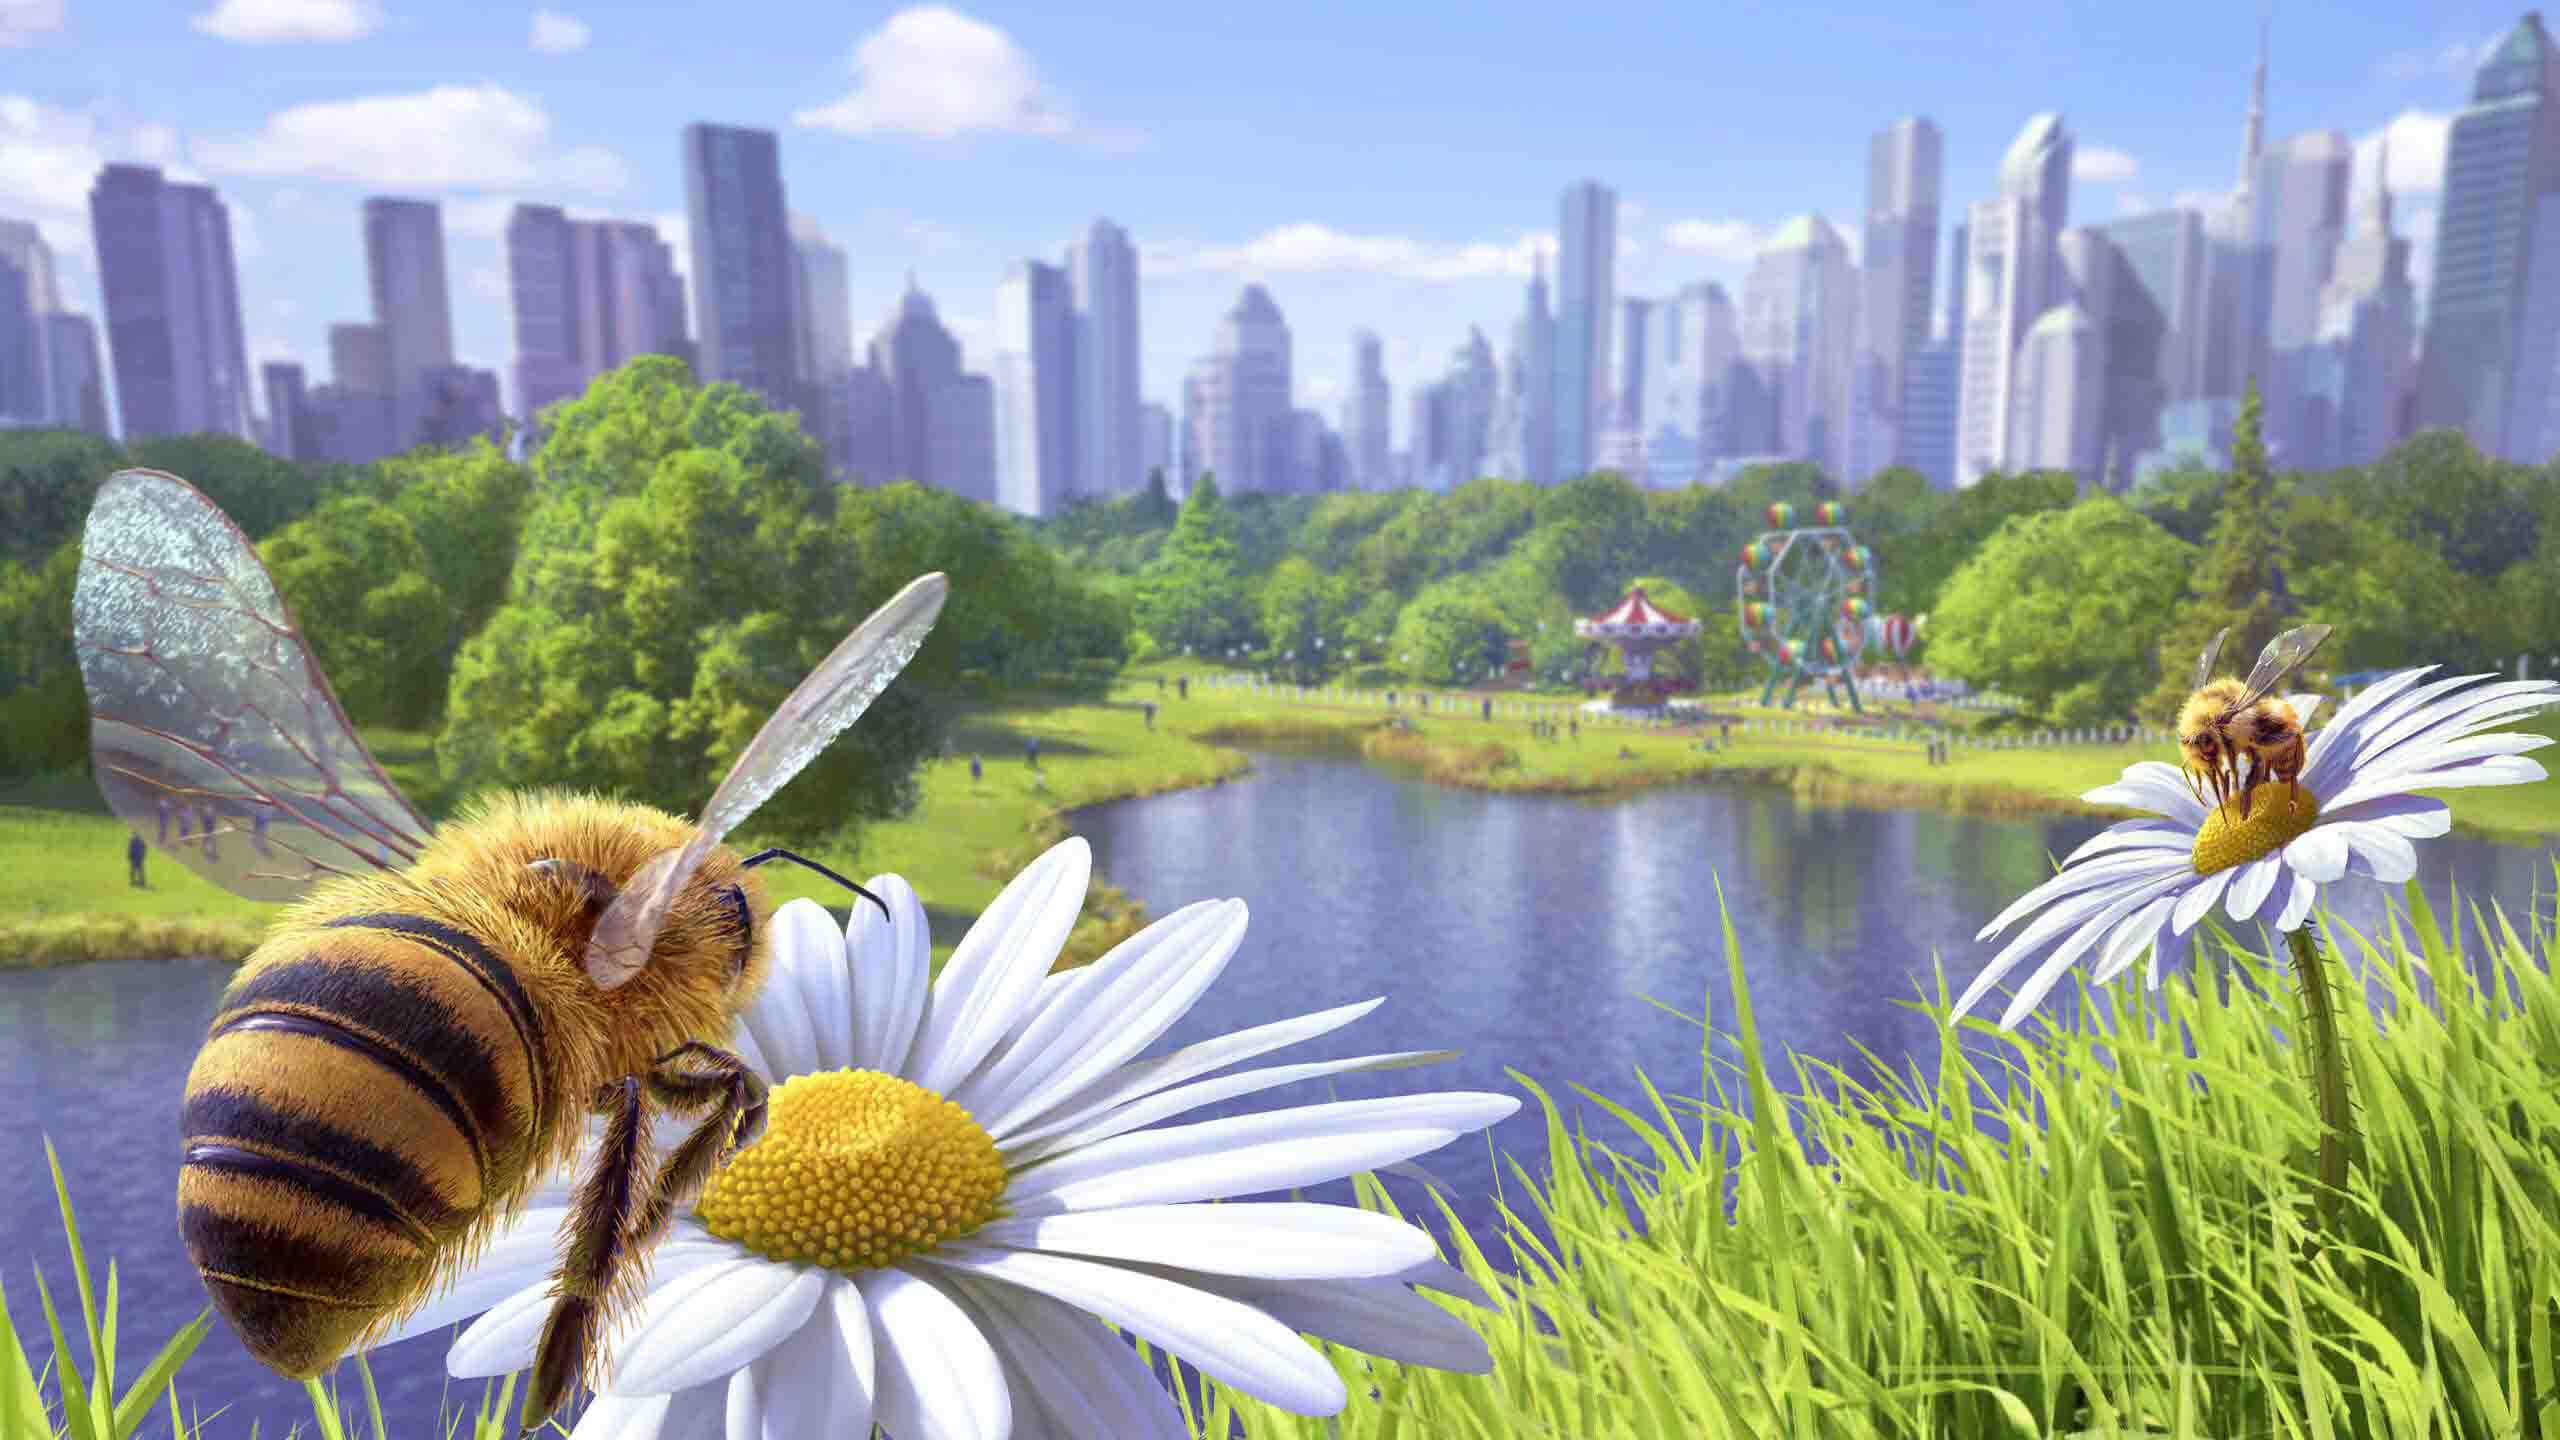 Bee Simulator System Requirements for PC Games minimum, recommended specifications for Windows, CPU, OS, Processor, RAM Memory, Storage, and GPU.